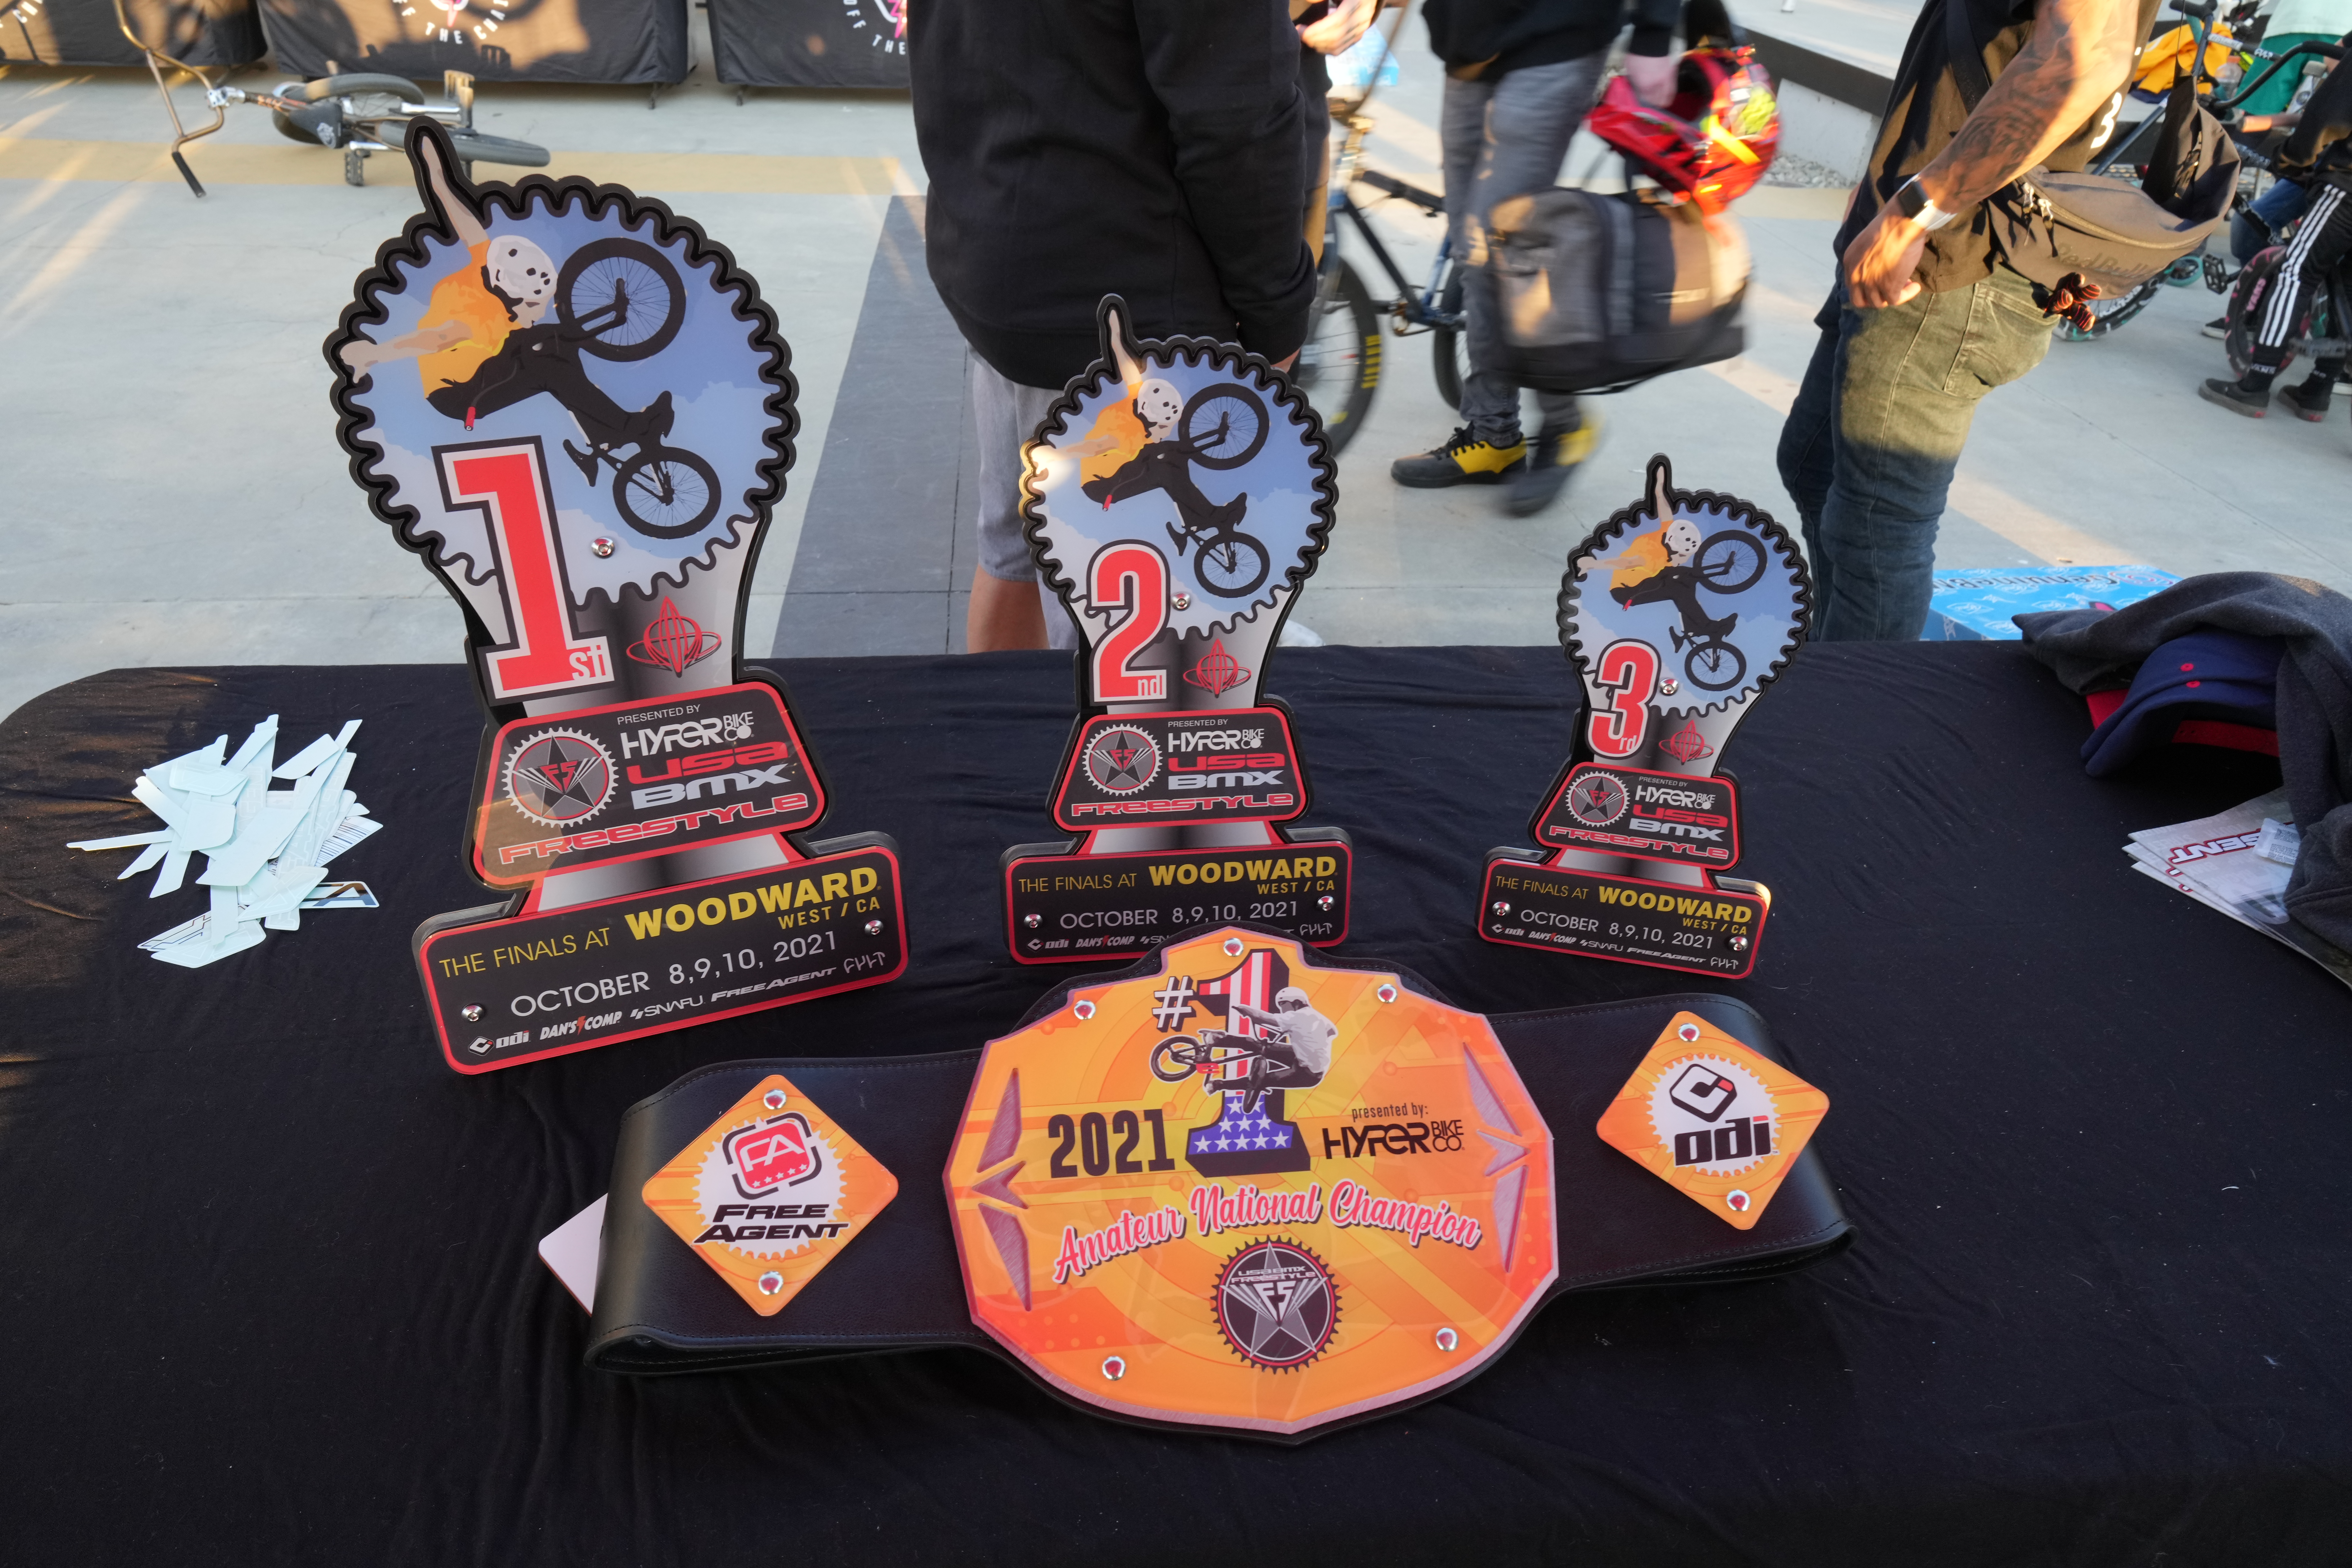 Free Agent riders cleaned house at this years USA BMX Freestyle National Championships.